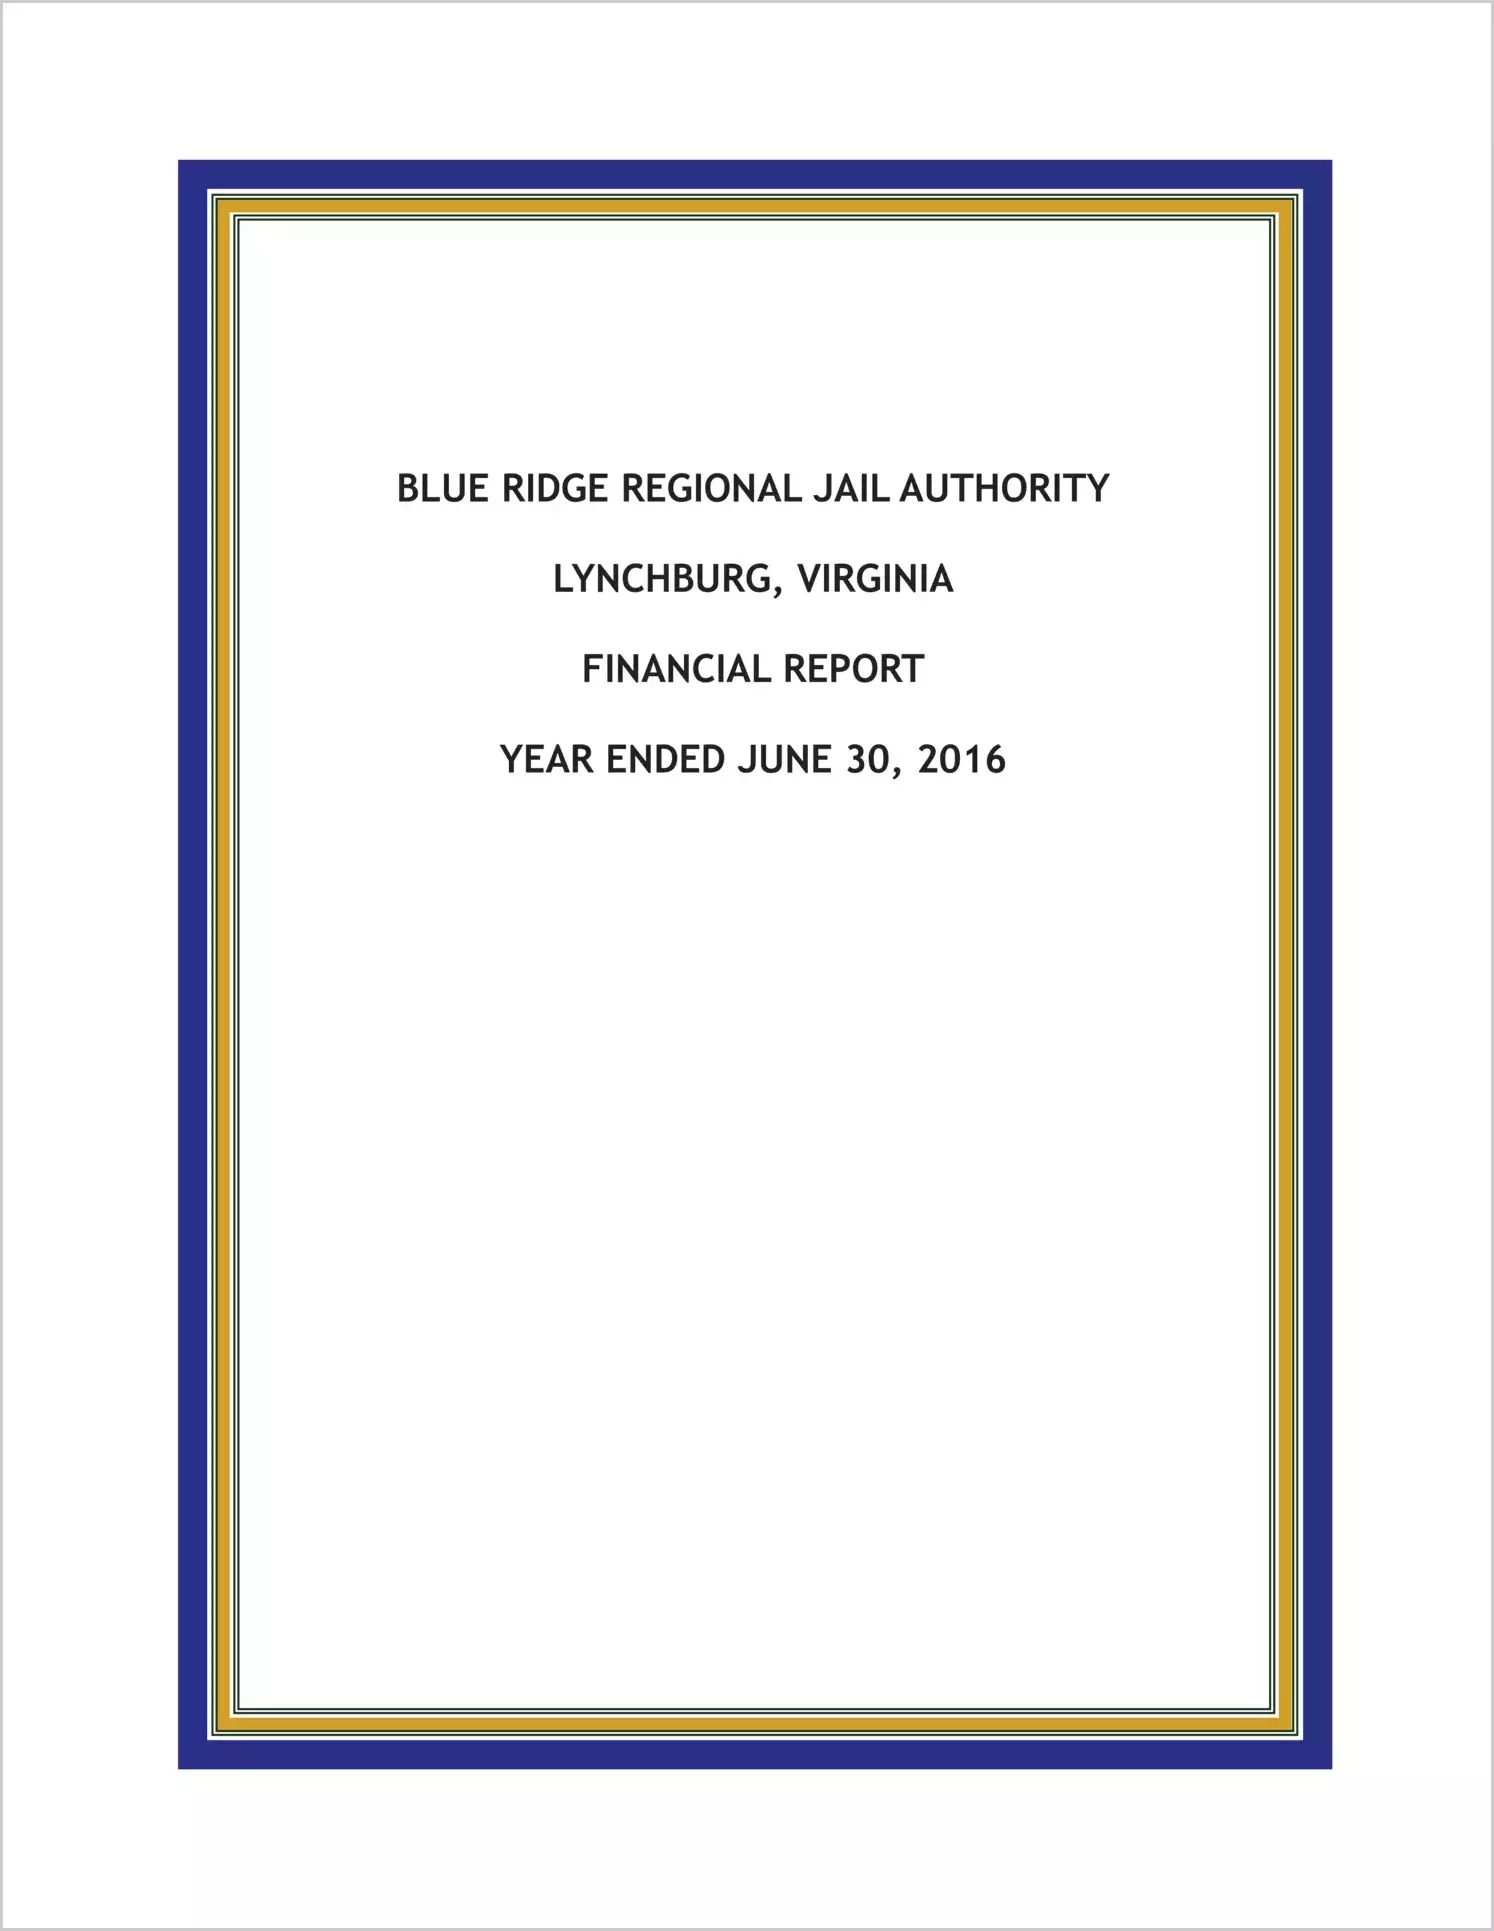 2016 ABC/Other Annual Financial Report  for Blue Ridge Regional Jail Authority